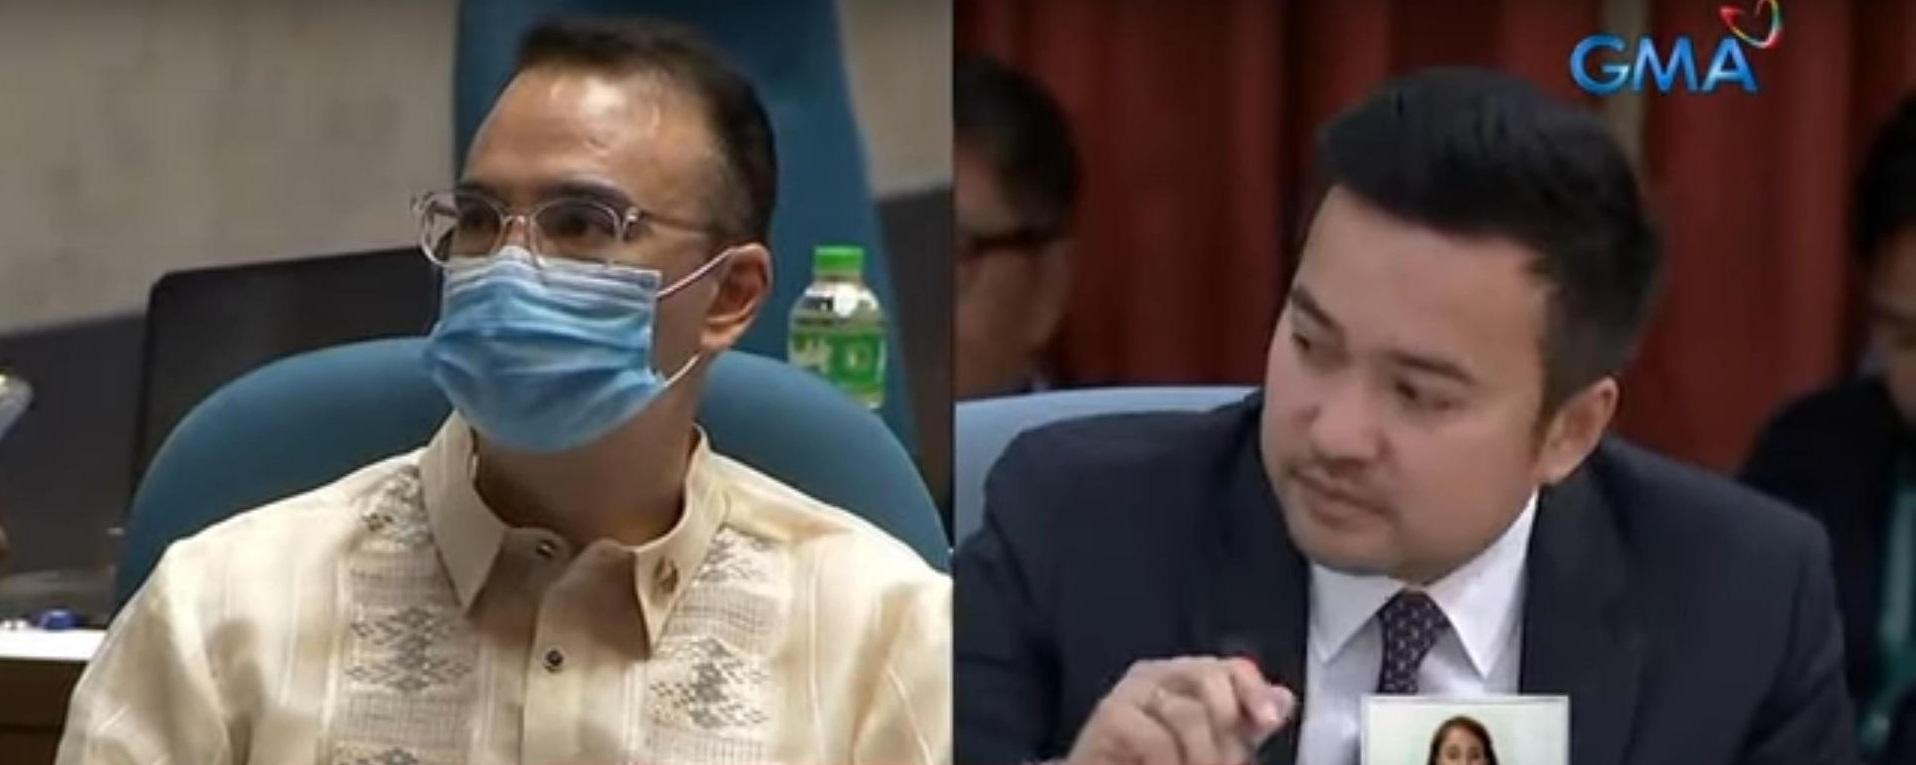 Political analyst to solons amid speakership row: Where are your moral compasses?